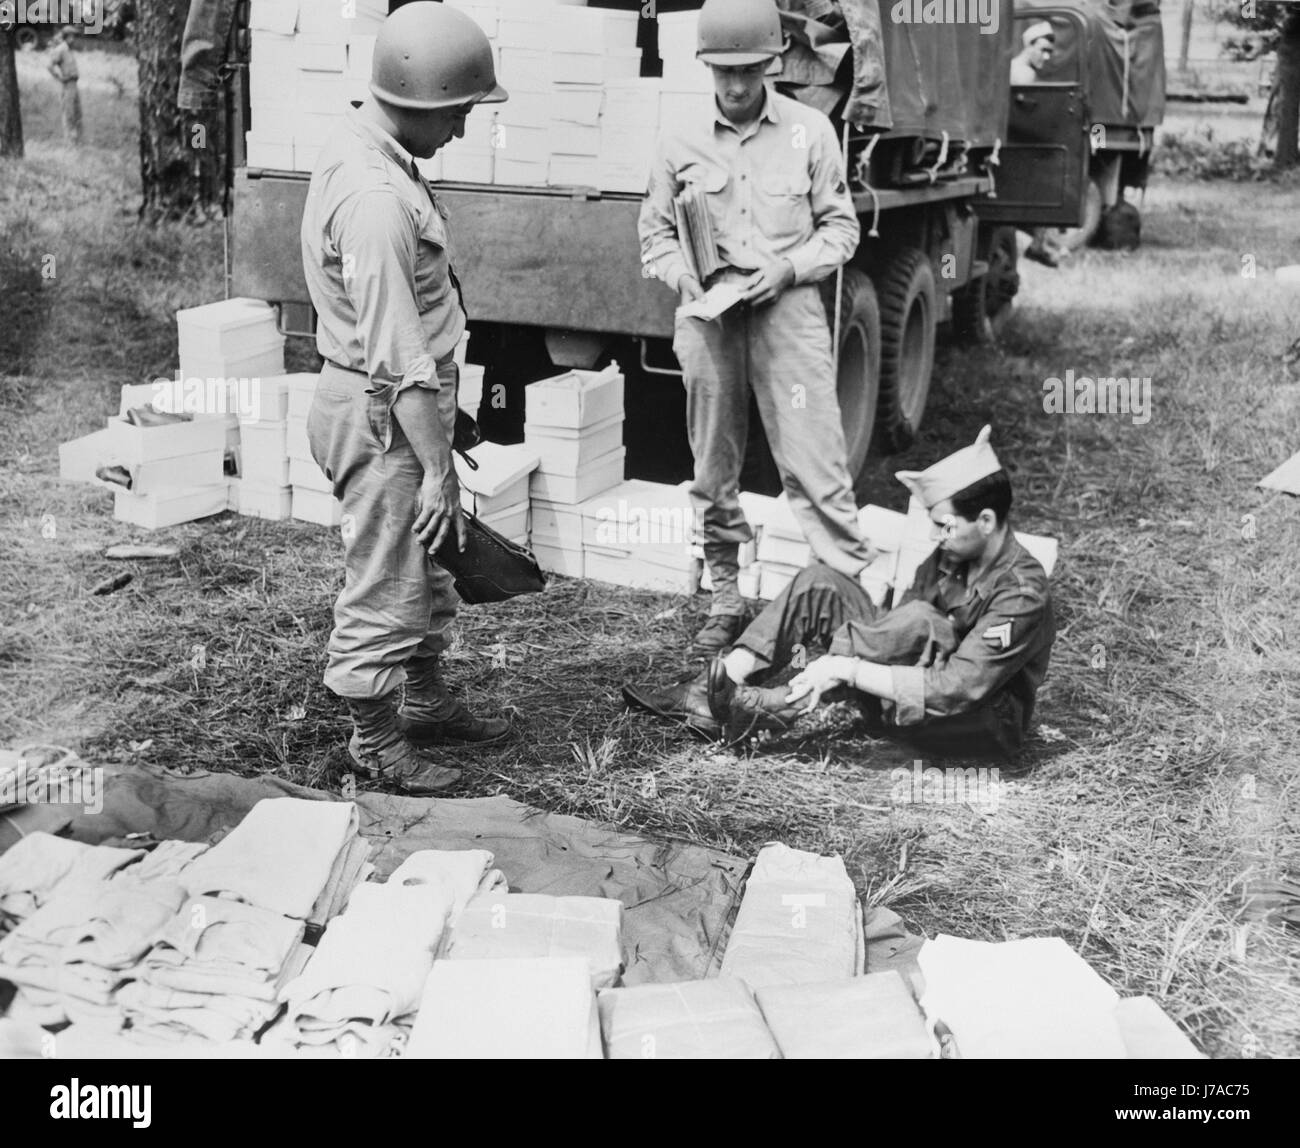 American soldier being fitted for a par of shoes, circa 1942. Stock Photo